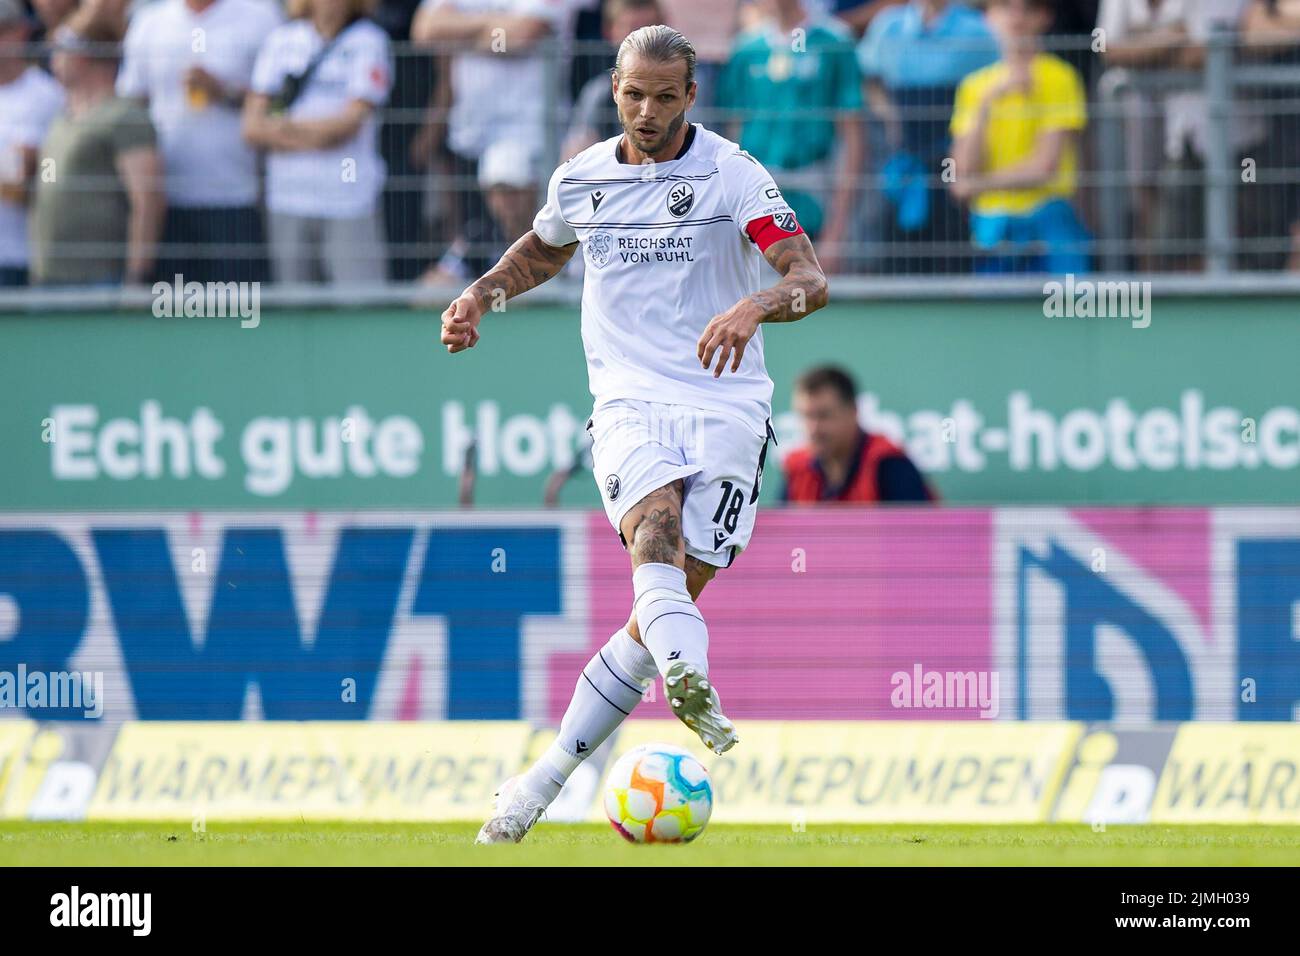 Sandhausen, Germany. 05th Aug, 2022. Soccer: 2nd Bundesliga, SV Sandhausen - Fortuna Düsseldorf, Matchday 3, BWT-Stadion am Hardtwald. Sandhausen's Dennis Diekmeier in action. Credit: Tom Weller/dpa - IMPORTANT NOTE: In accordance with the requirements of the DFL Deutsche Fußball Liga and the DFB Deutscher Fußball-Bund, it is prohibited to use or have used photographs taken in the stadium and/or of the match in the form of sequence pictures and/or video-like photo series./dpa/Alamy Live News Stock Photo